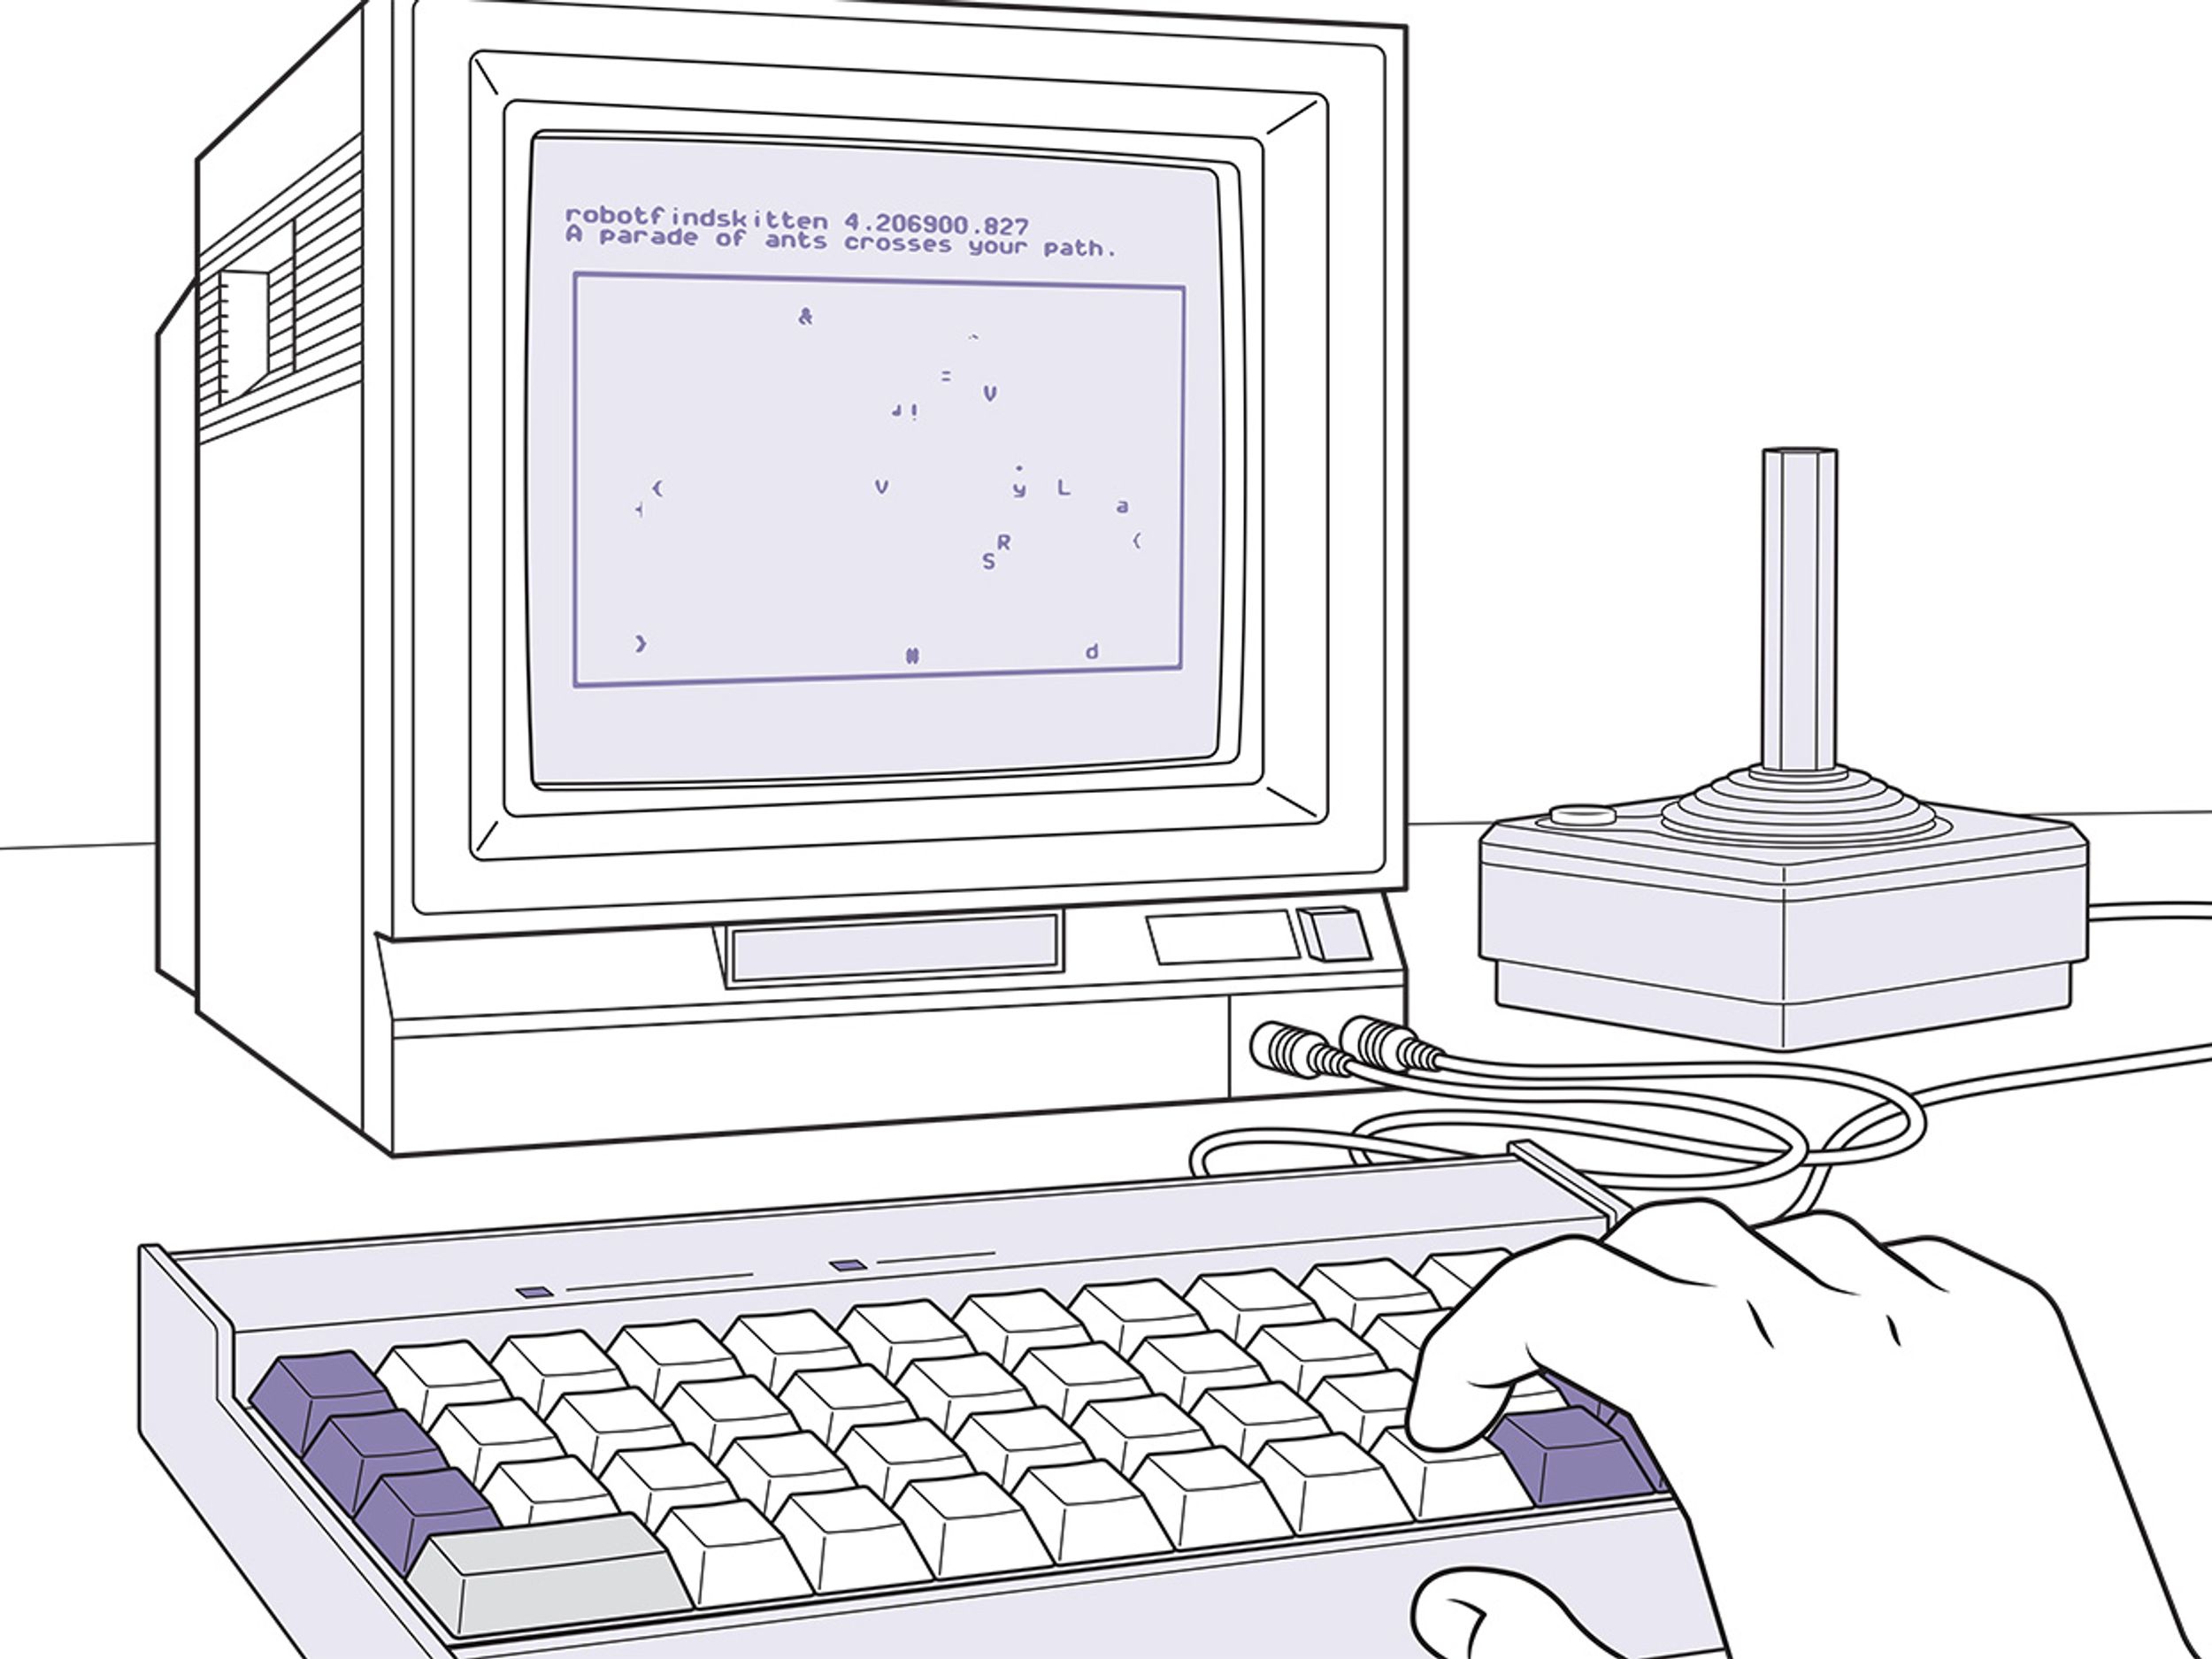 Illustration of old computer monitor, keyboard and joystick, with hand on keyboard.